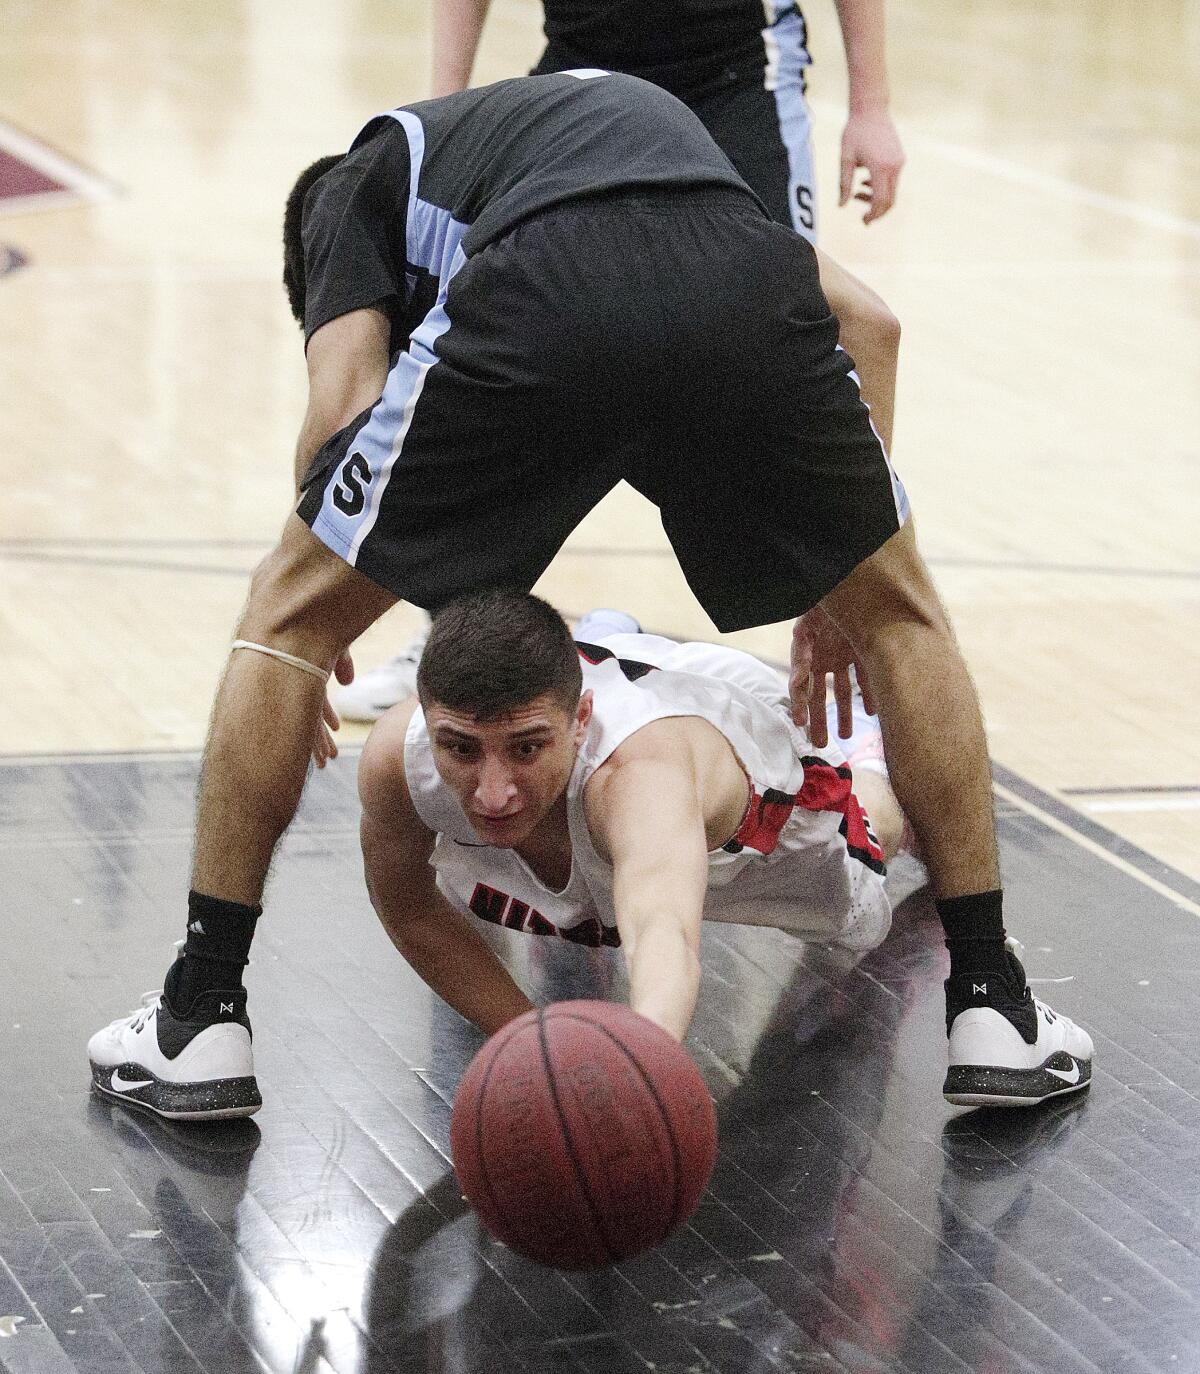 Glendale's Manny Kapoushian dives through the legs of Salesian's Efren Lemus for a loose ball in the CIF Southern Section division III-AAA second-round boys' basketball playoff in at Glendale High School on Friday, February 14, 2020. Salesian won the game in overtime beating Glendale 55-49.